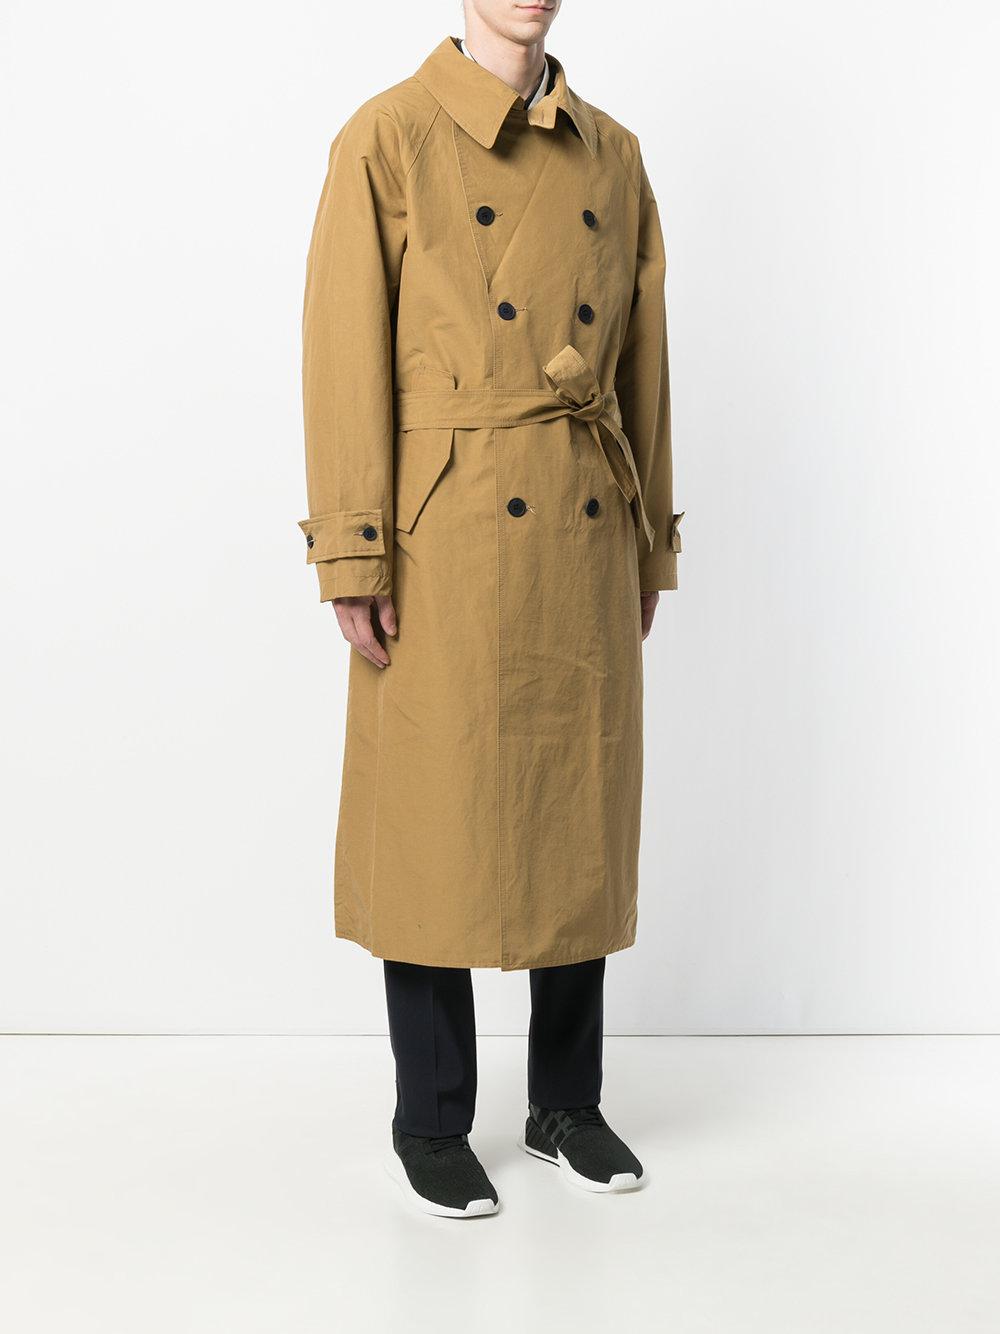 Lyst - Sunnei Belted Trench Coat in Brown for Men